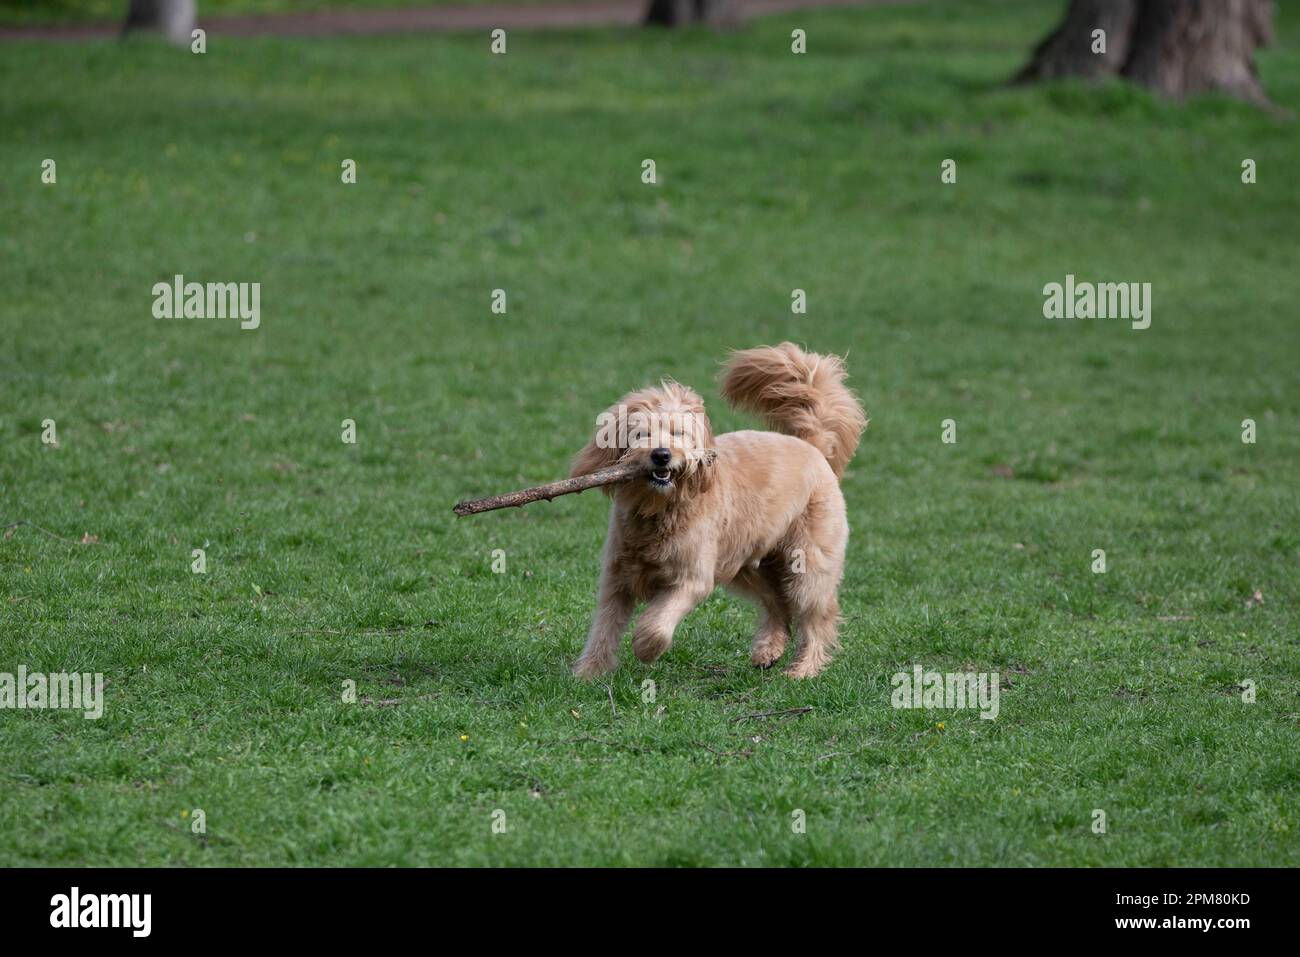 Mini Goldendoodle, bites in stick, considered suitable dog for allergy sufferers, cross between Golden Retriever and Poodle. Stock Photo